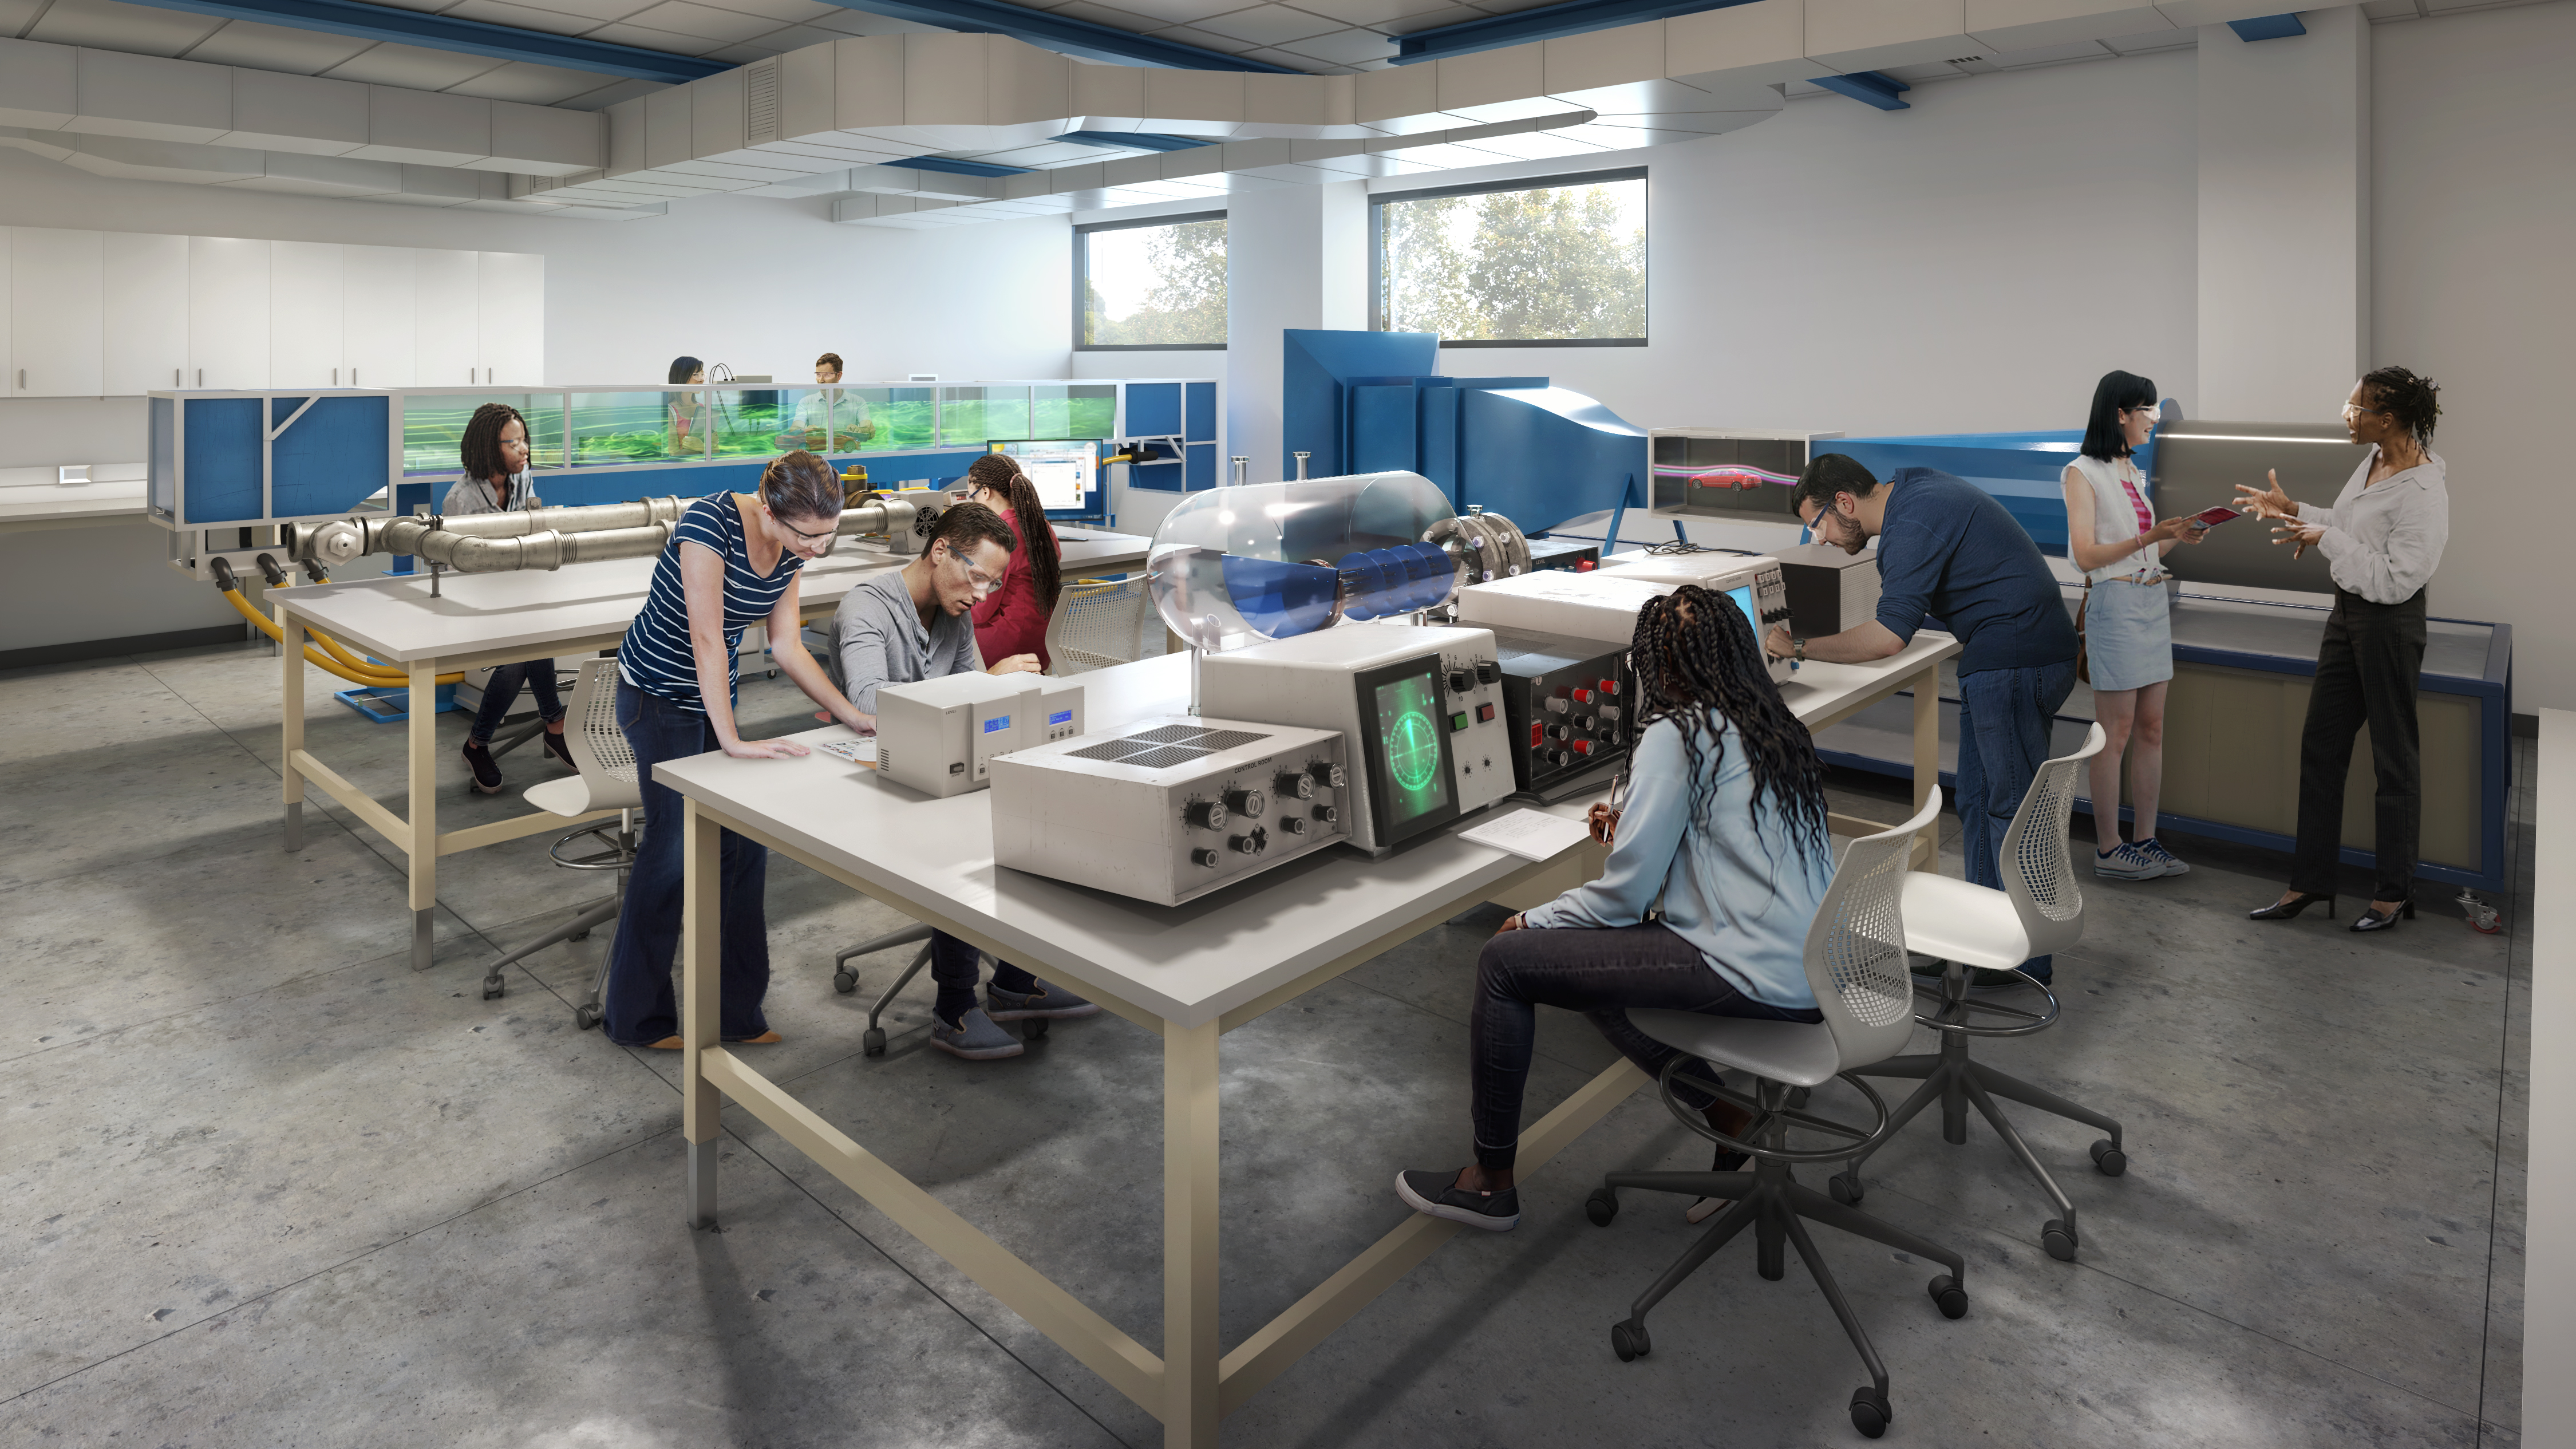 Artist's Rendering: Students and faculty using technology in the engineering fluids and process control lab